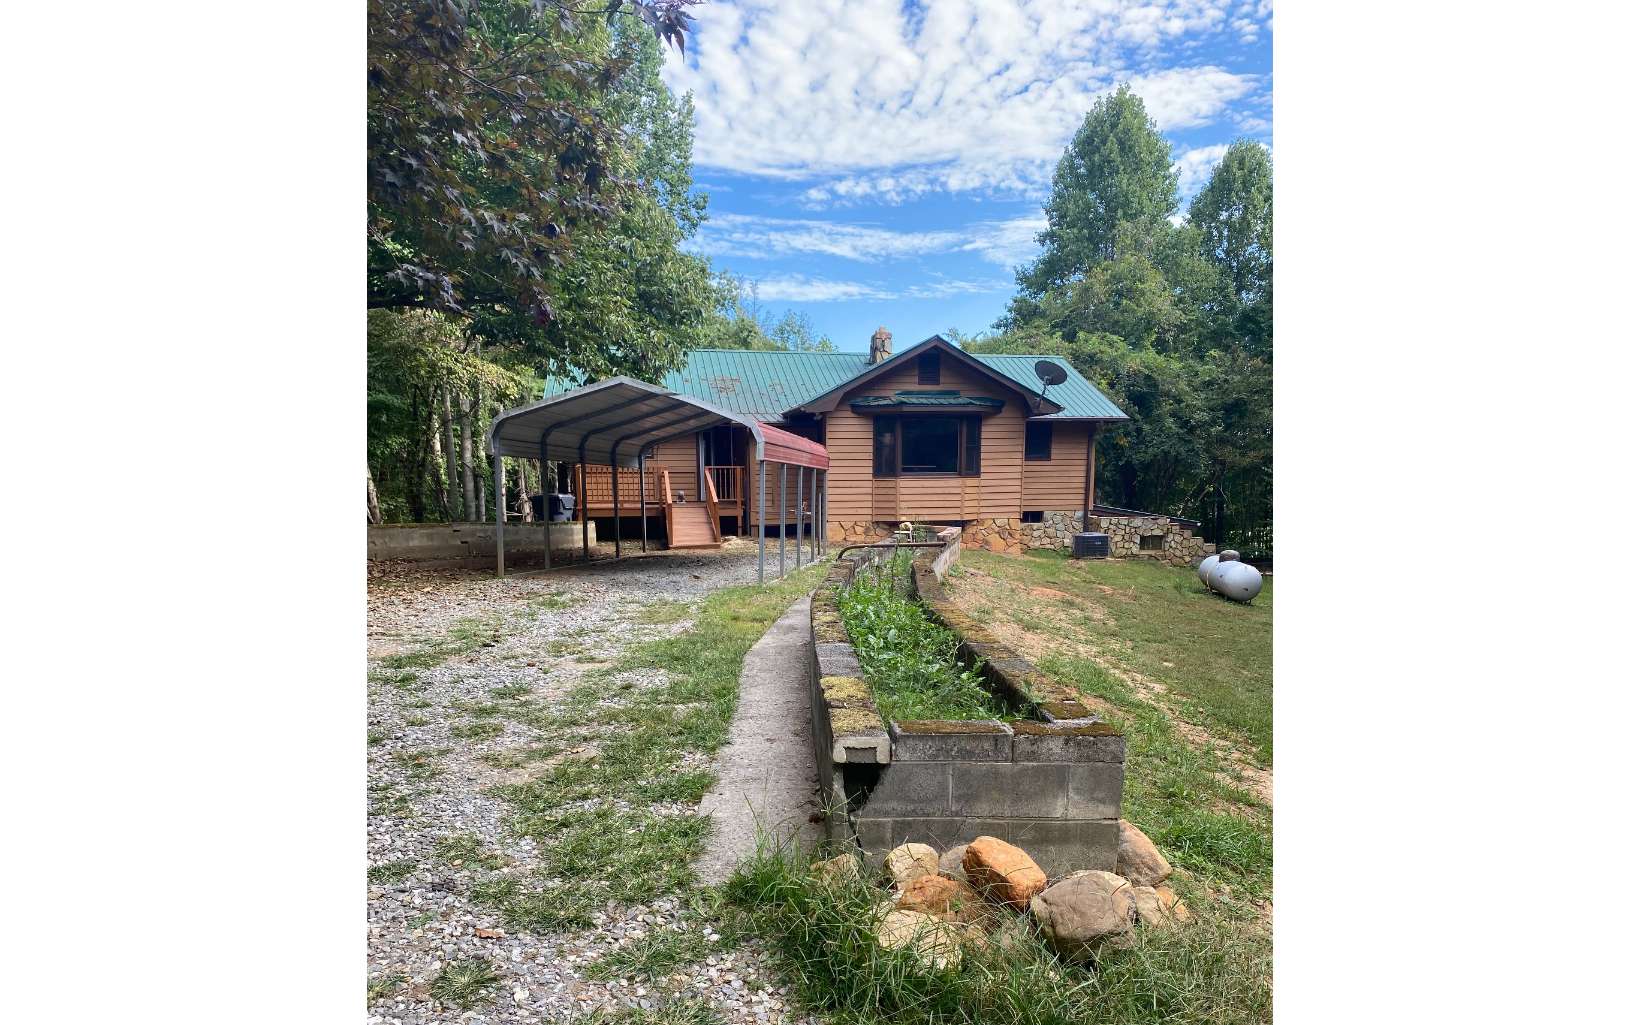 Acreage and privacy. If you want to get away from the city life, this is it! 7.6 ac. with beautiful woods, privacy, and a large pond. Great possibilities, Great neighborhood and close to good fishing, hiking and outdoor enjoyment. Located near Blairsville, Blue Ridge and Murphy N. C.